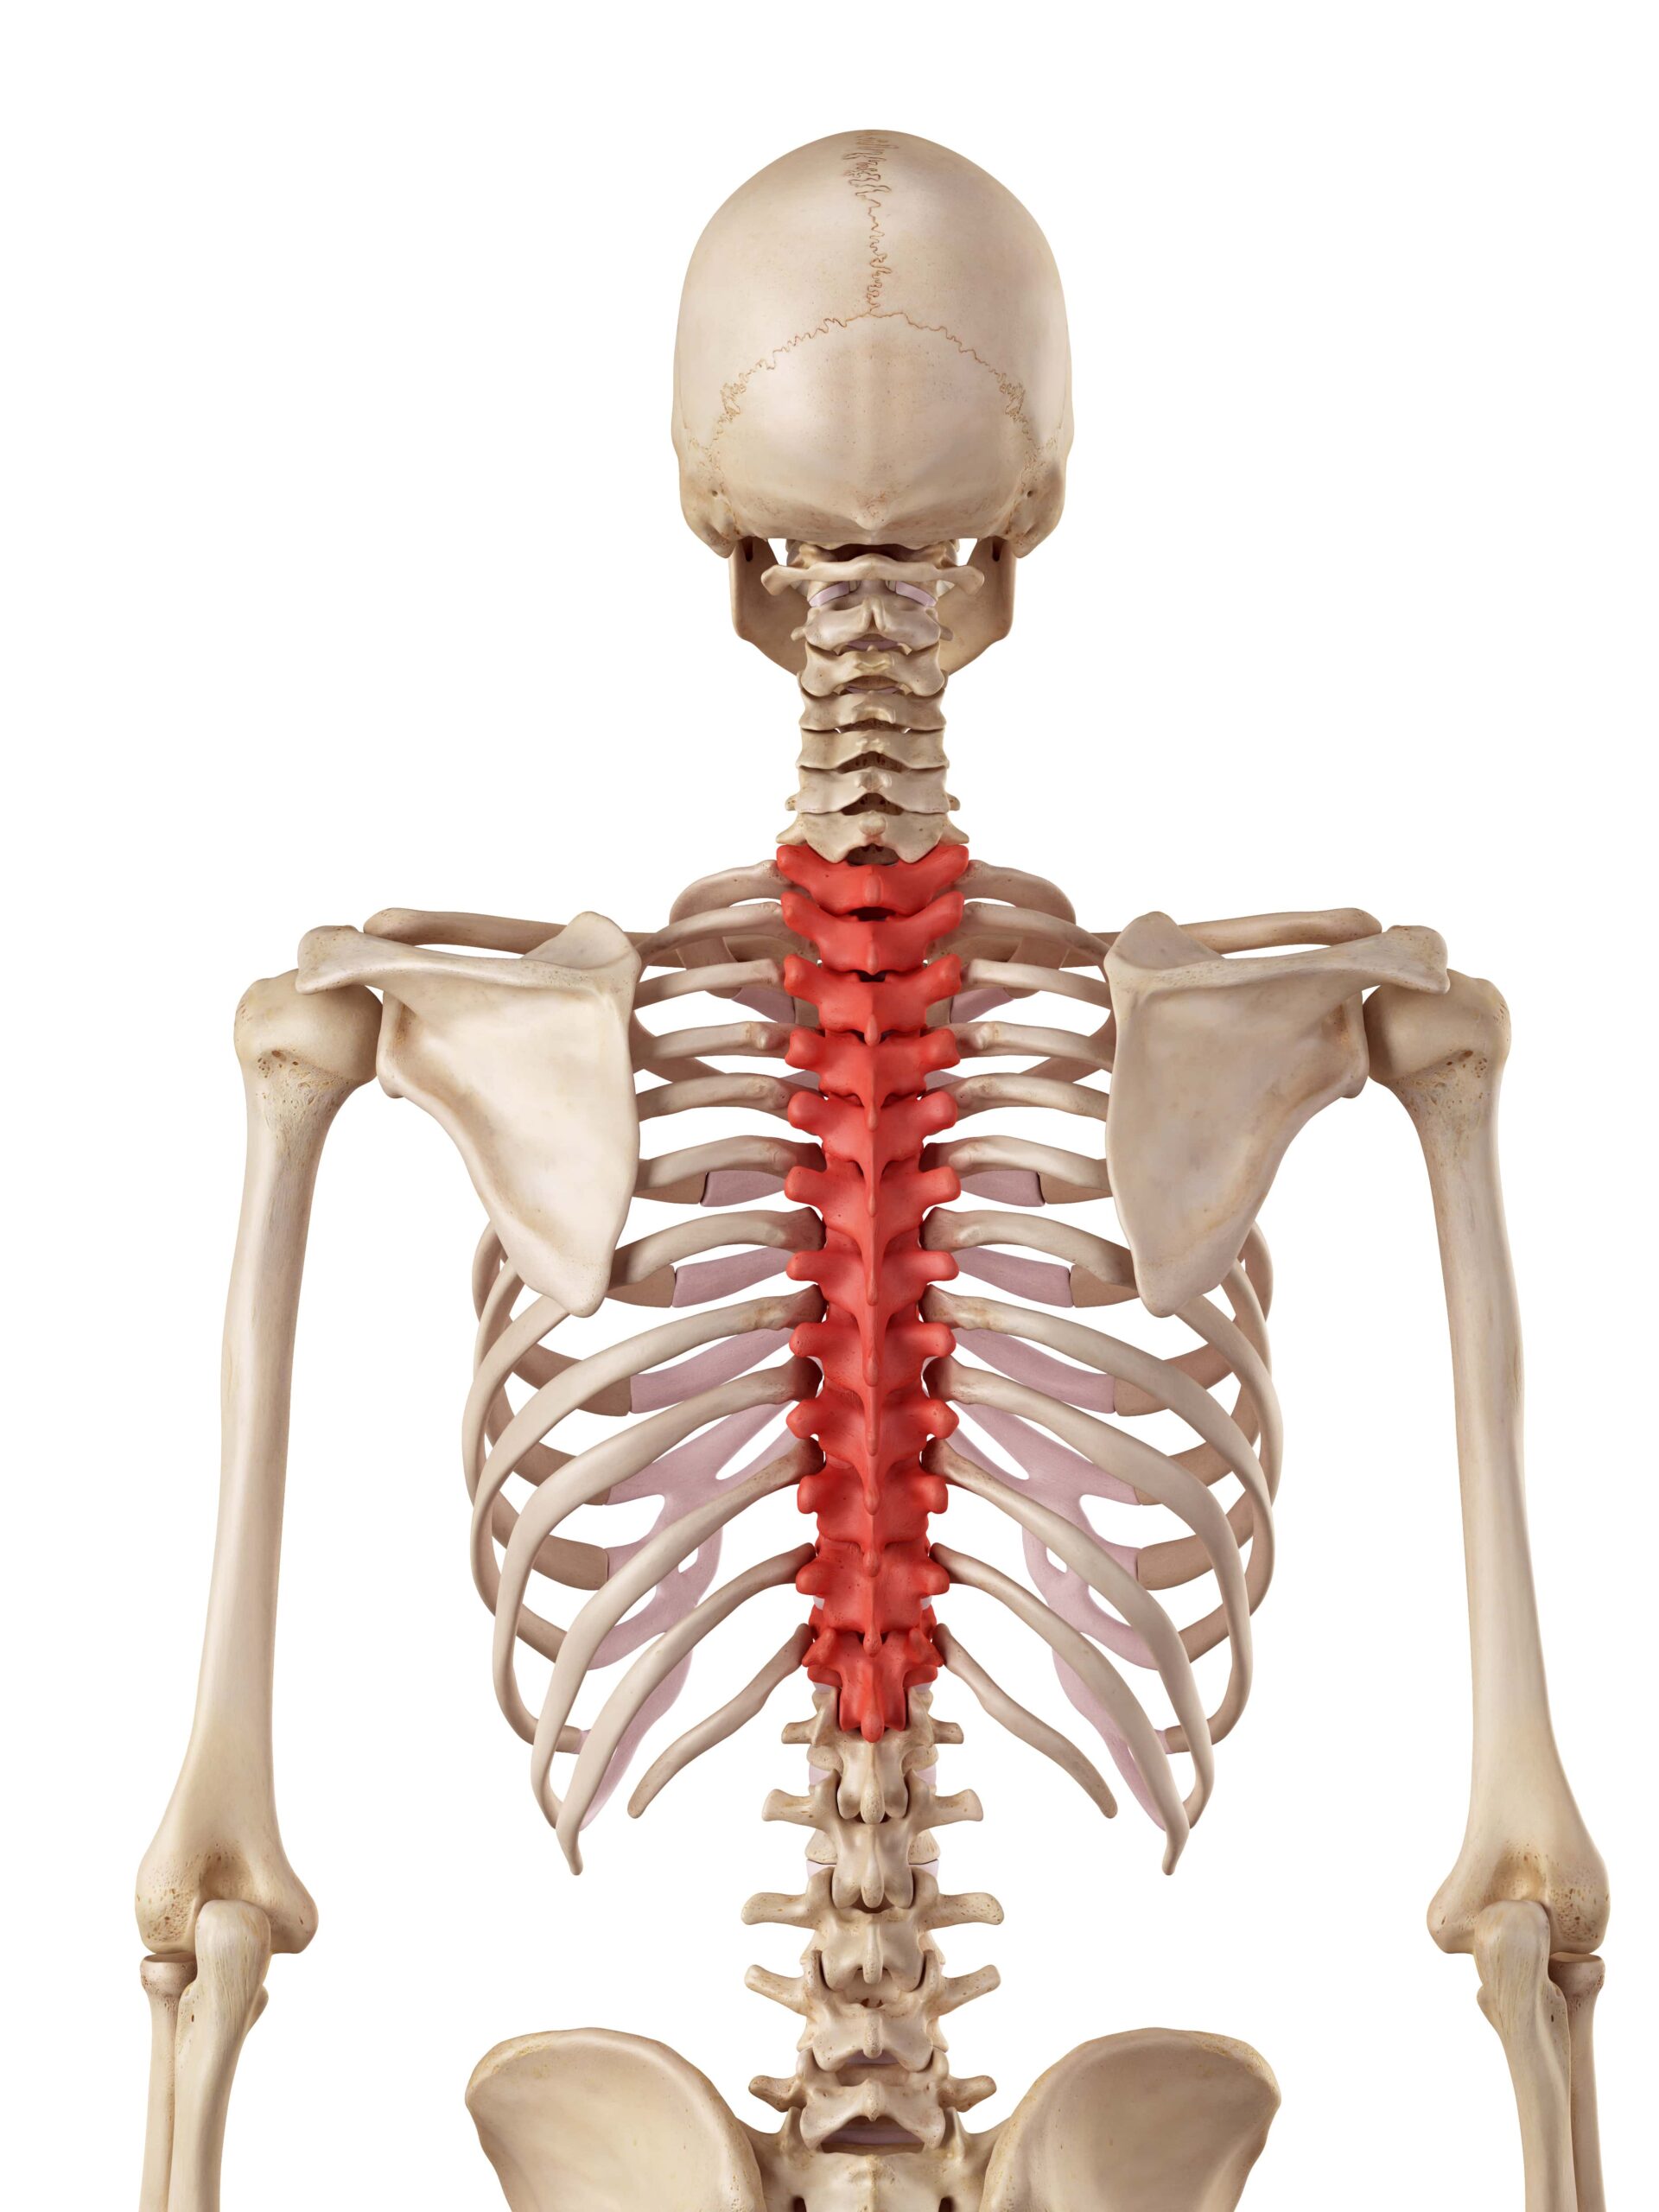 medical accurate illustration of the thoracic spine